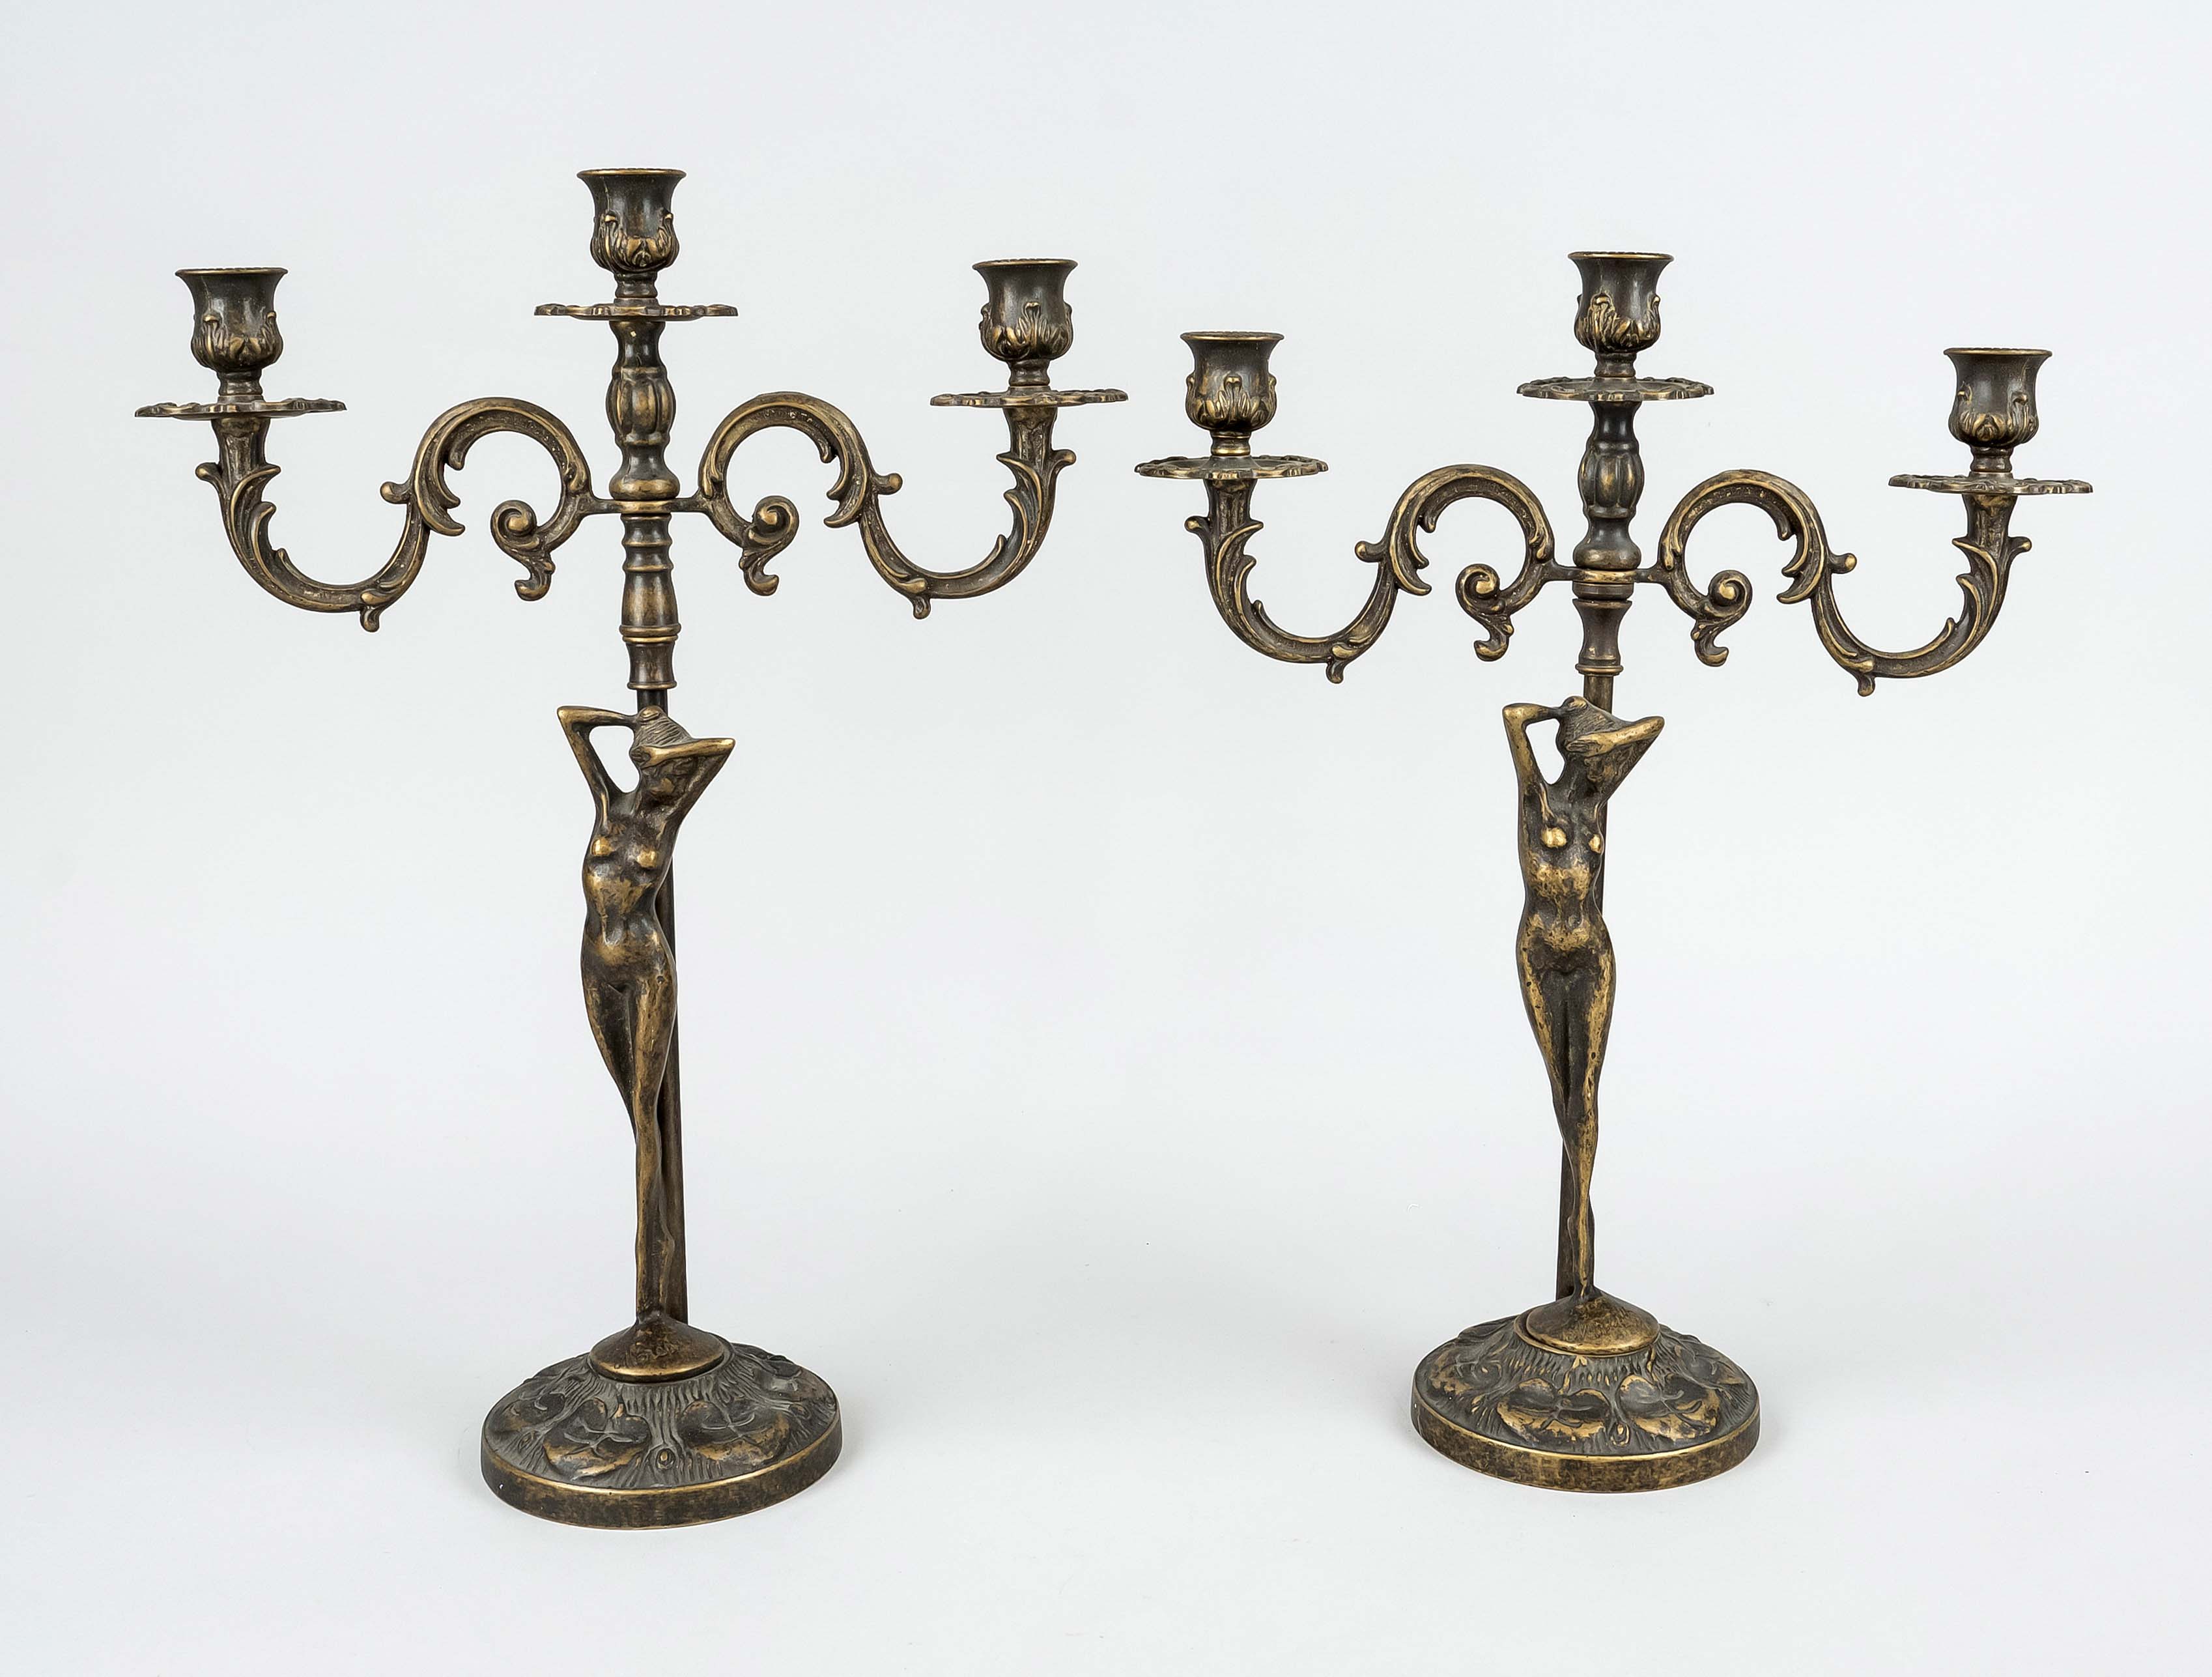 Pair of figural candlesticks, 20th c., brass patinated. Round base with water lily relief, shaft